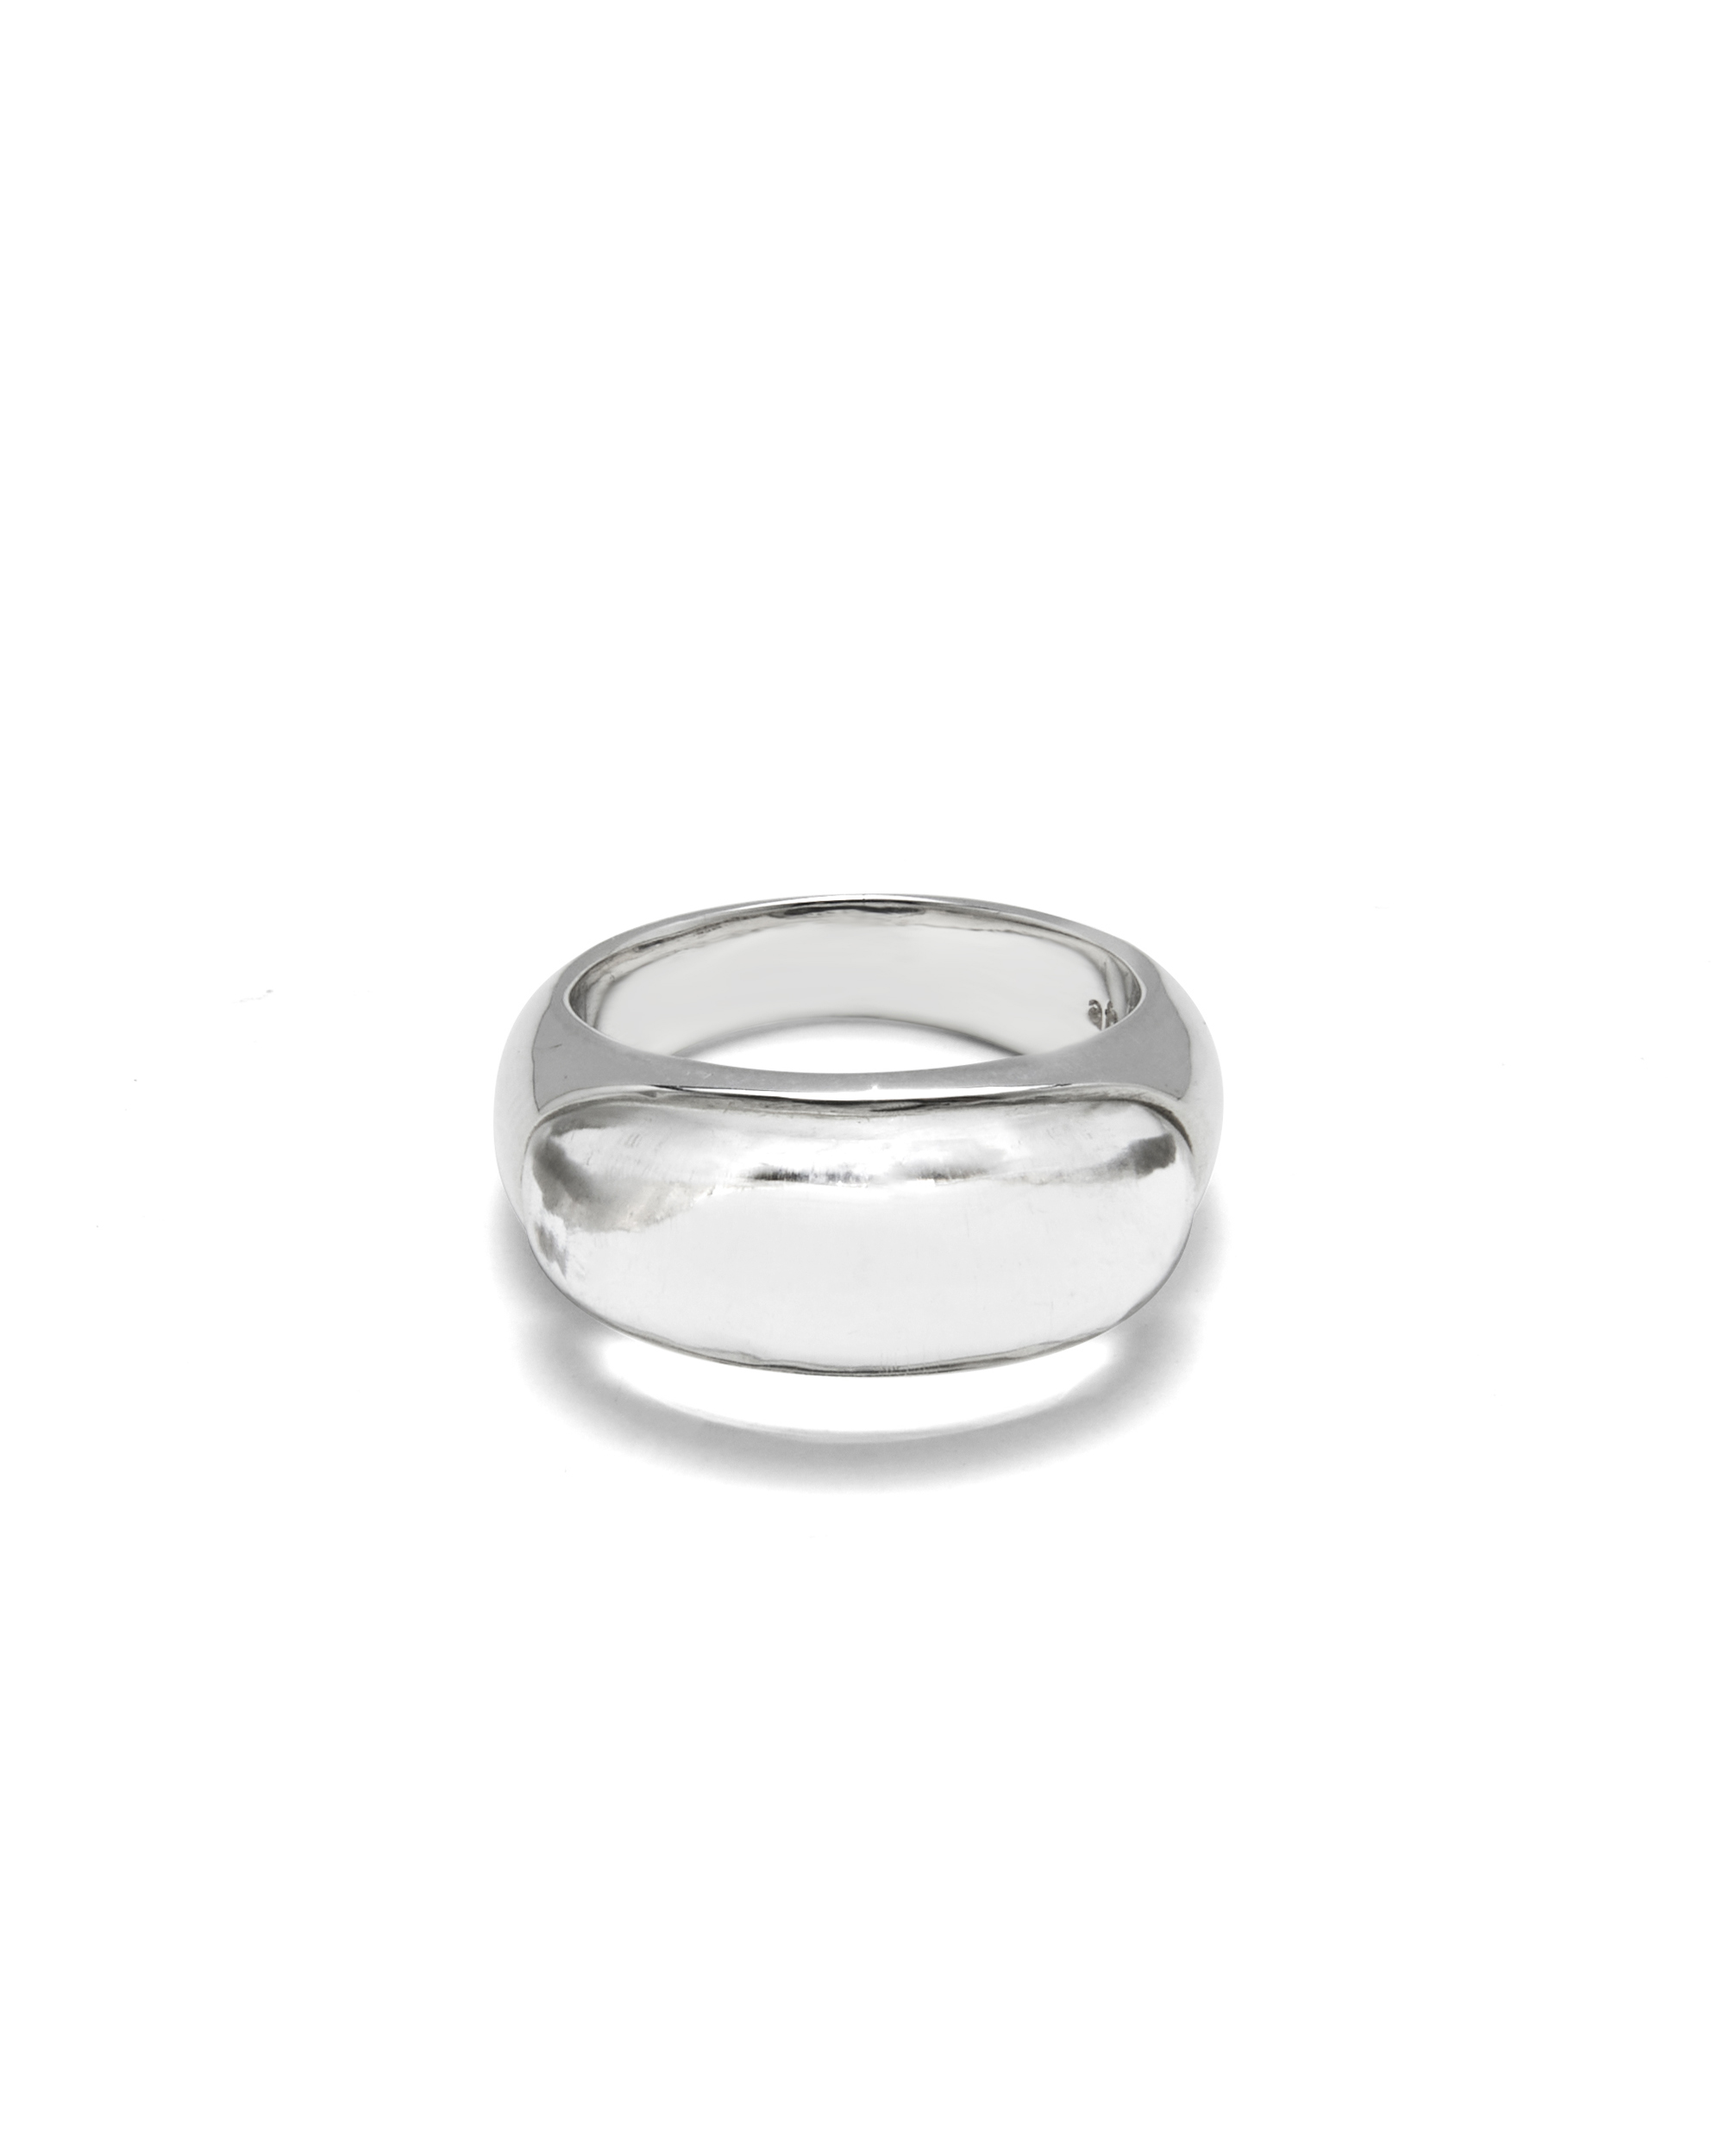 Clean and Clear Quartz Ring